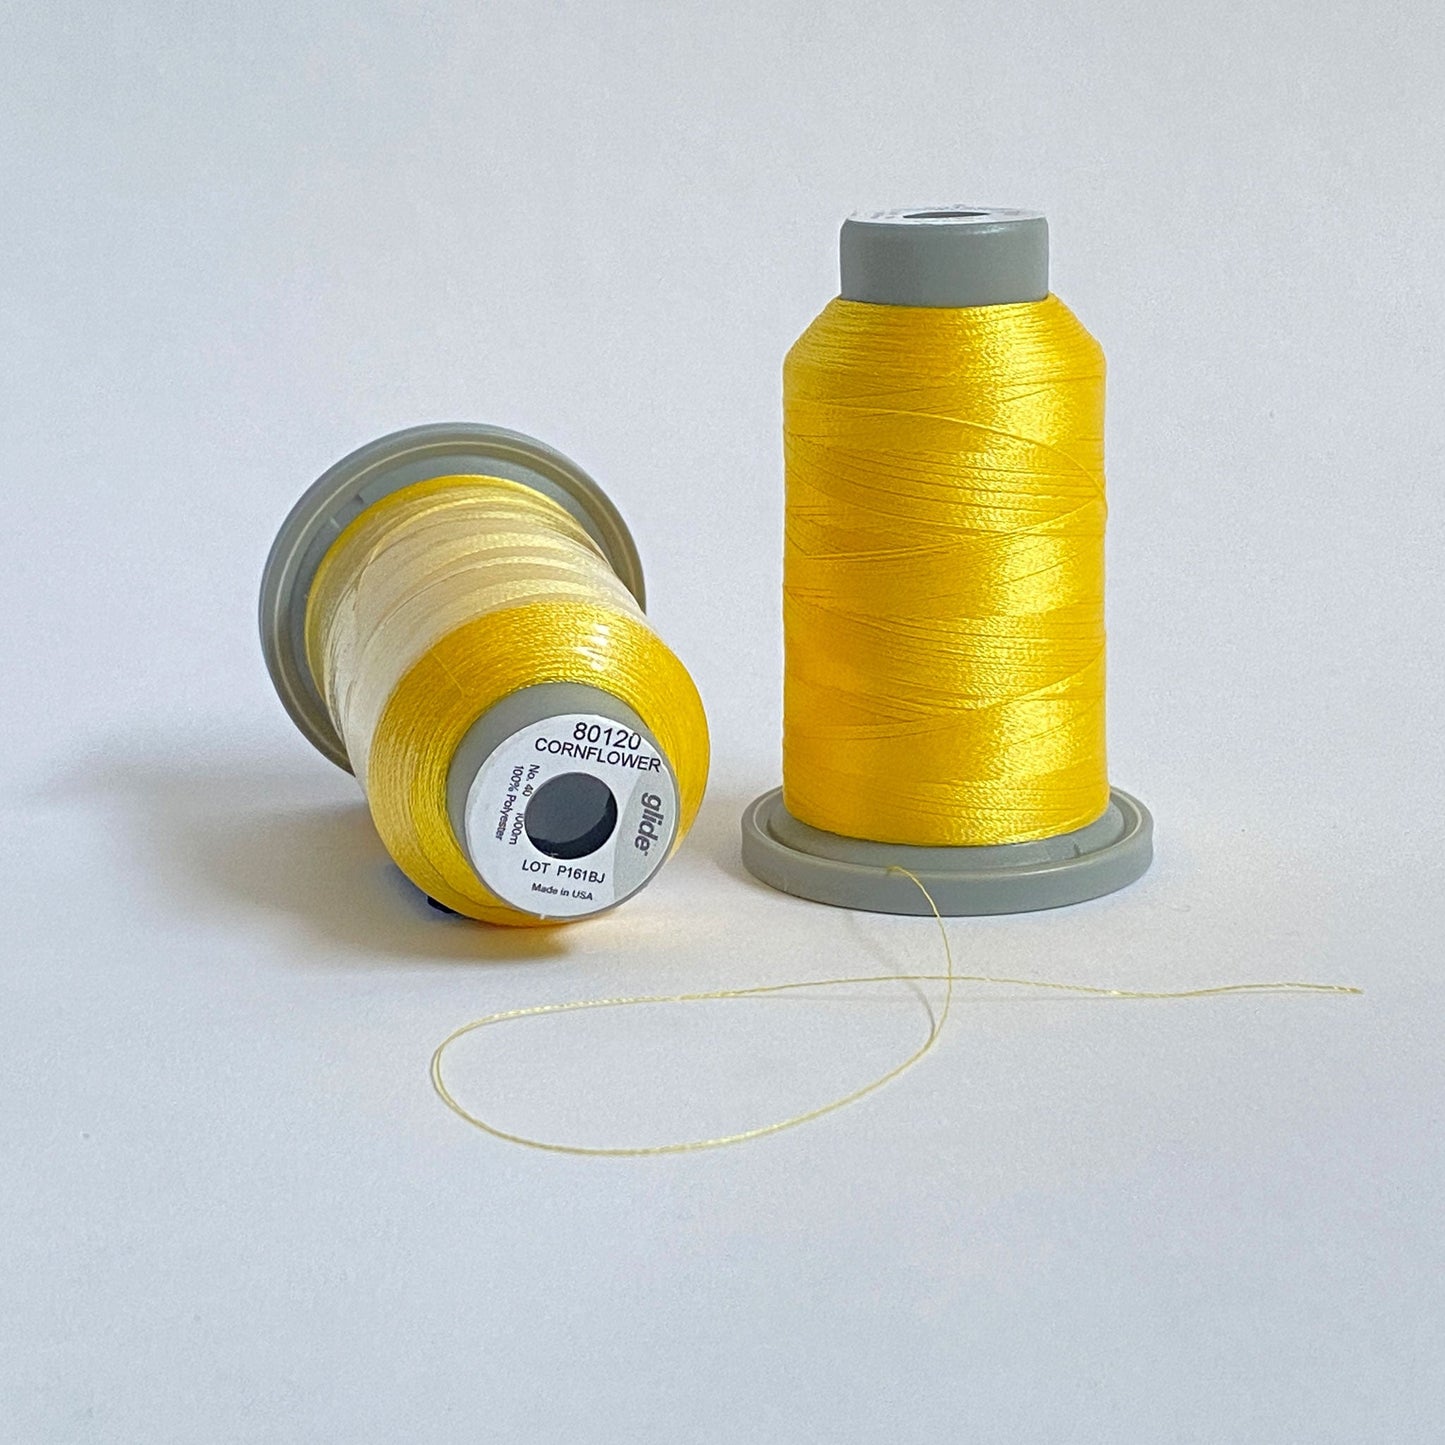 Glide 40 wt. Trilobal polyester thread by Fil-Tec comes on a 1,100yd mini spool. Cornflower (80120) is a bright yellow, perfect for the bright shining sun, sparkling stars, or briliiant flowers. Stitcher's Joy